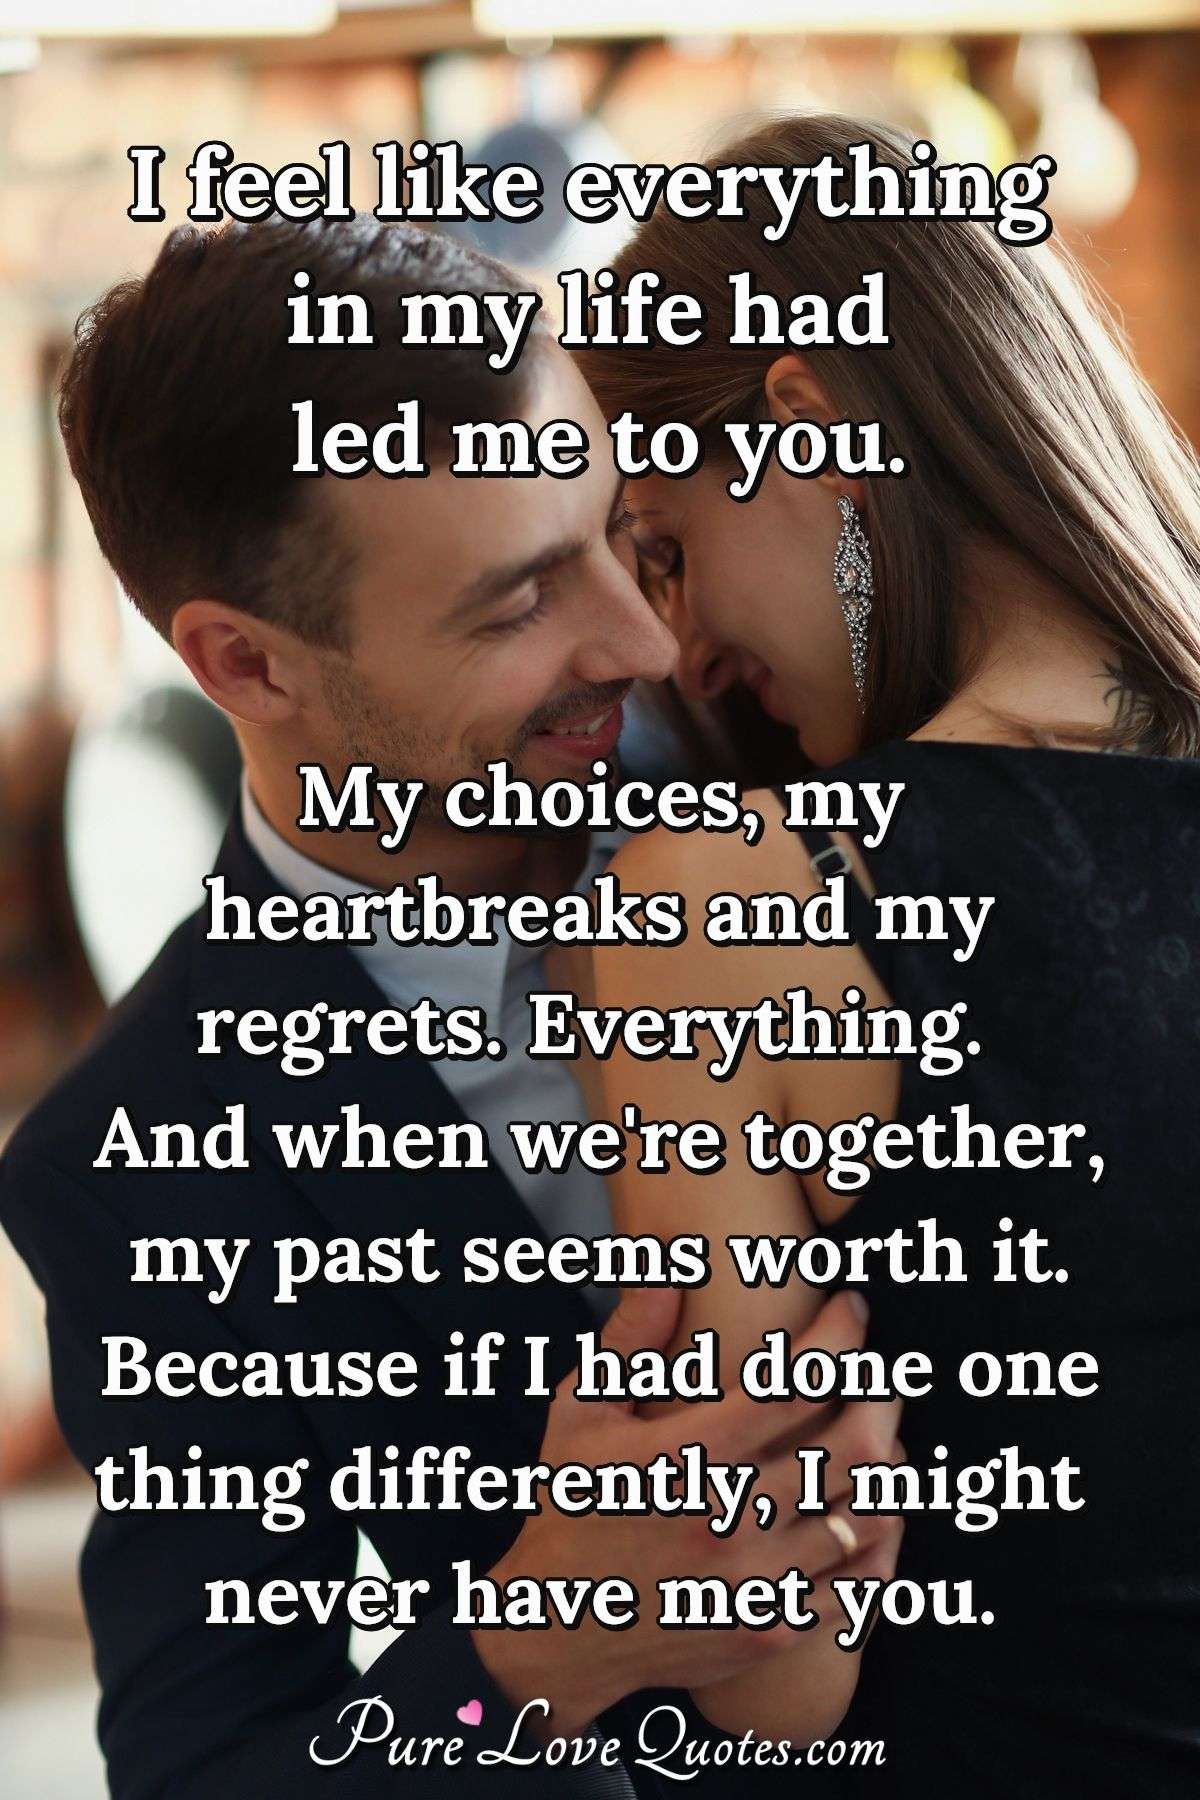 spin intelligence celebration I feel like everything in my life had led me to you. My choices, my  heartbreaks... | PureLoveQuotes